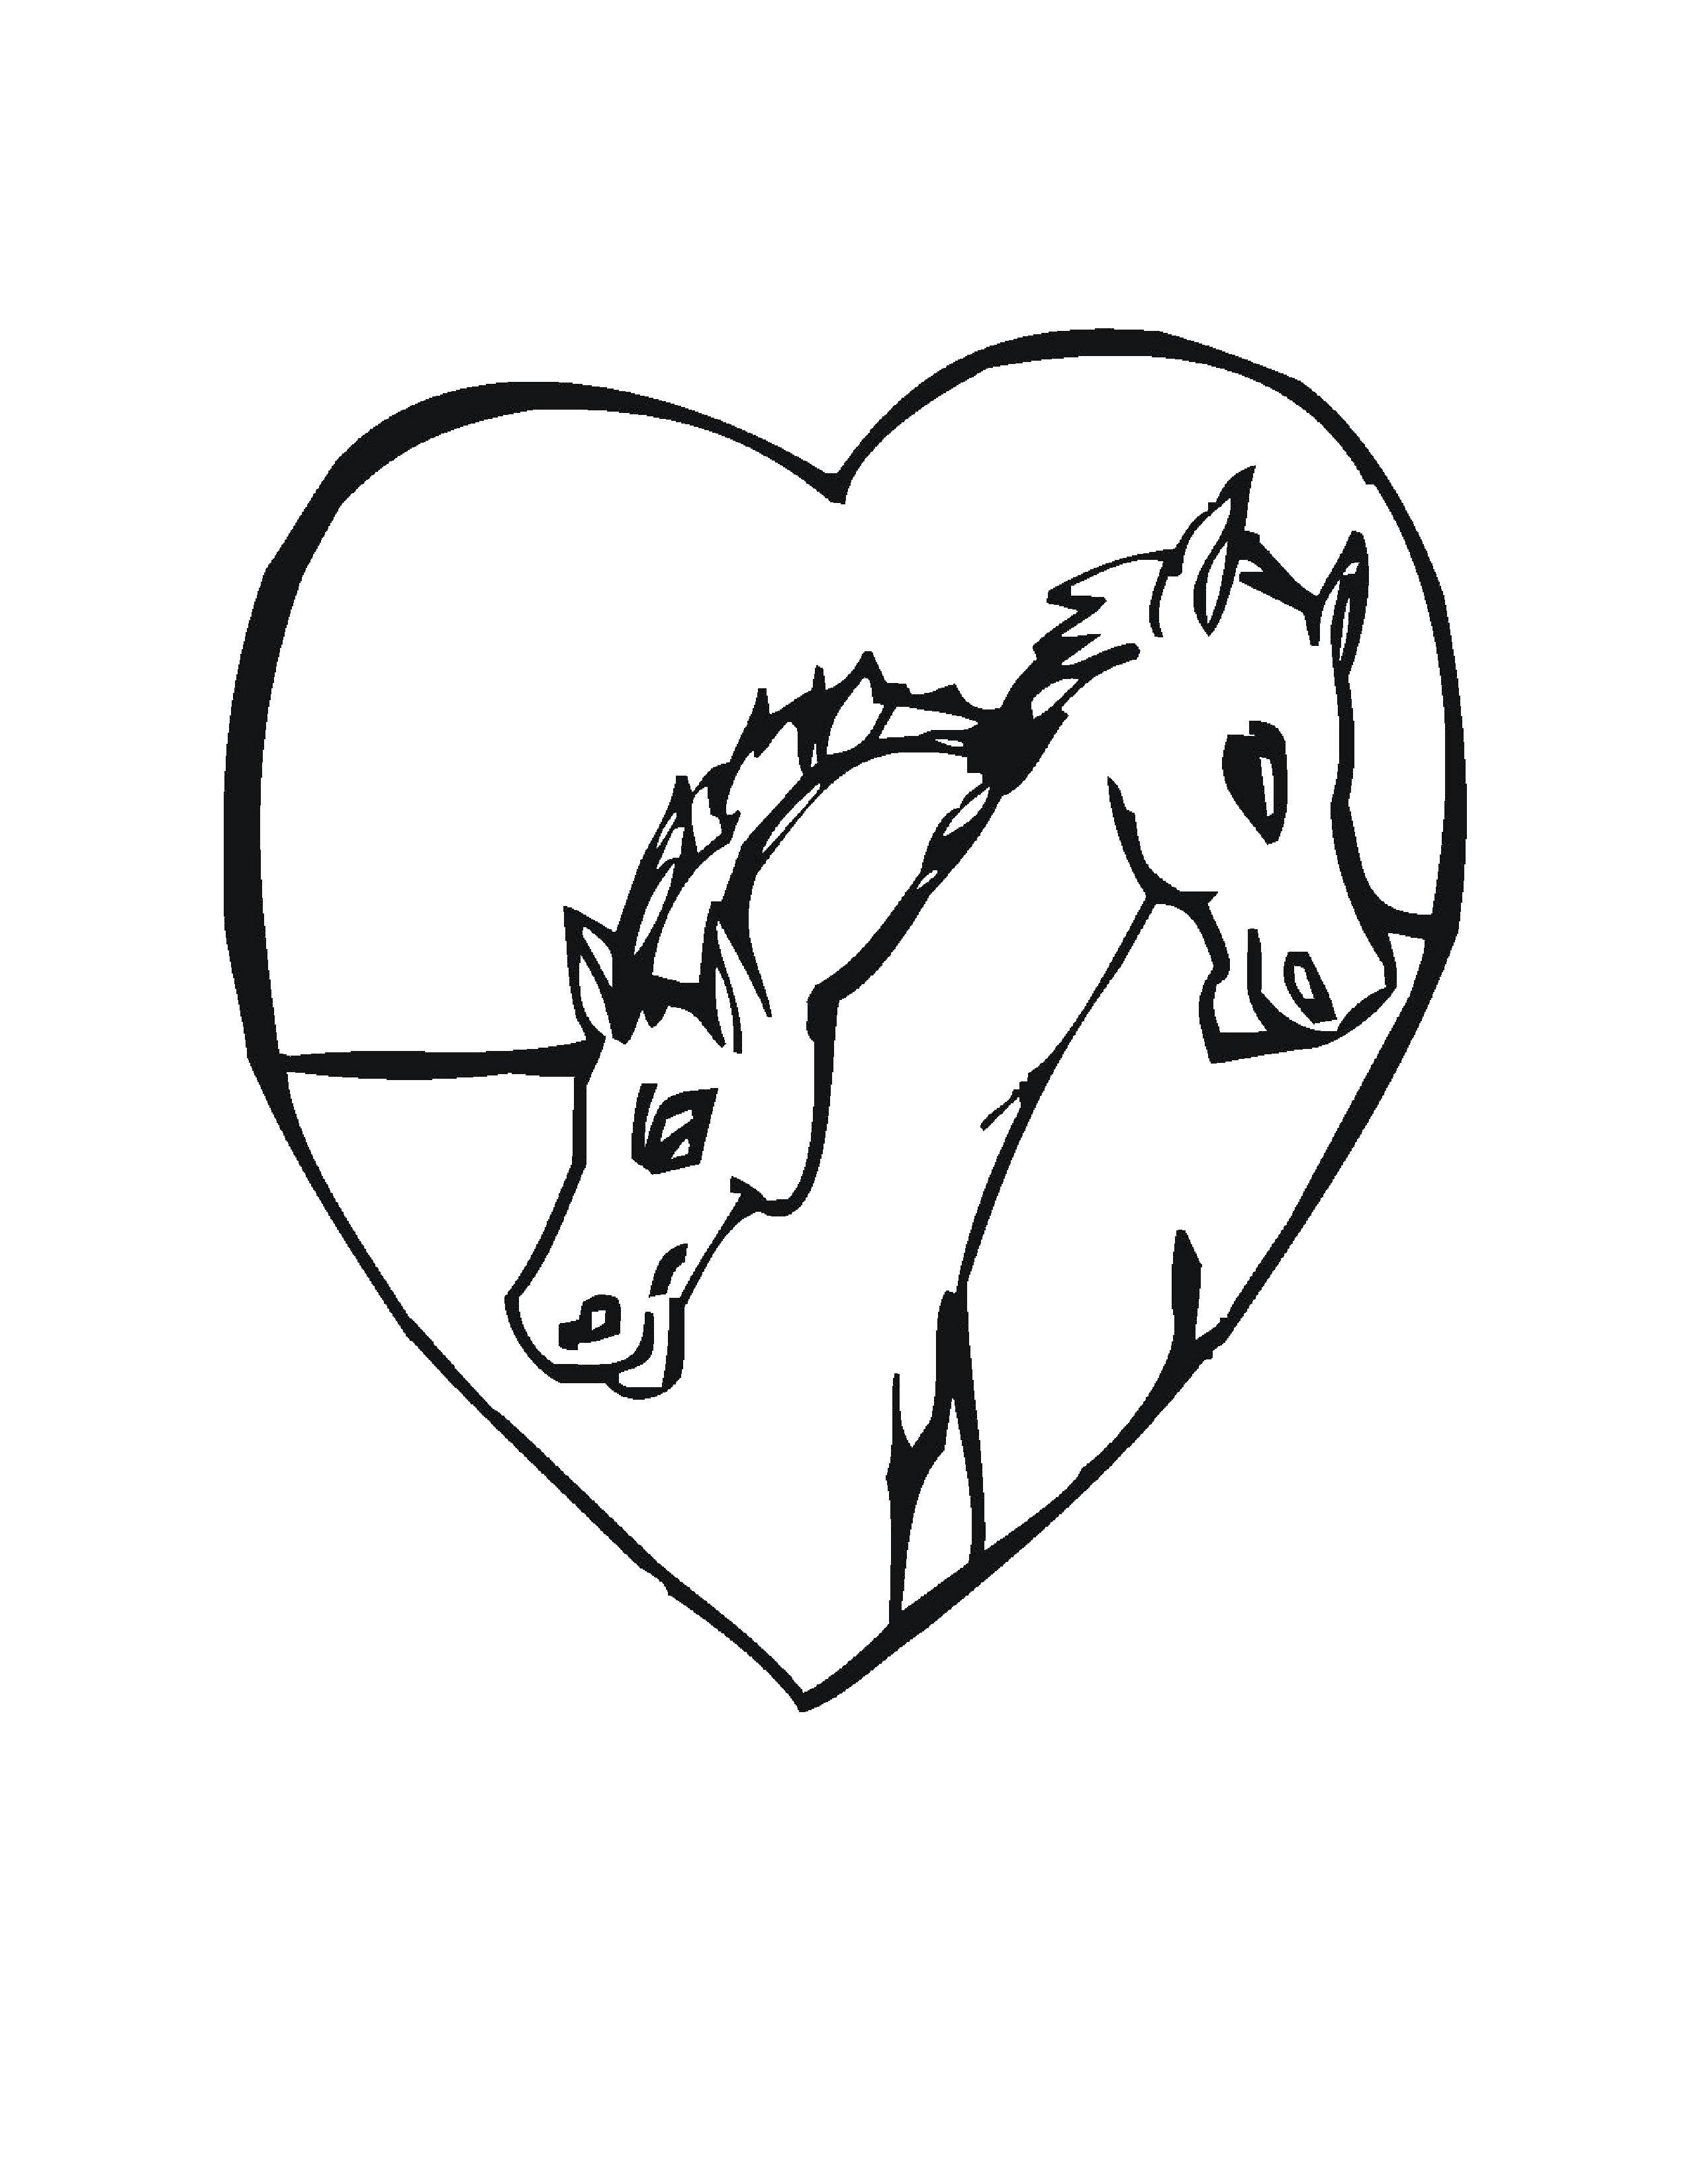 Coloring The love of horses. Category Animals. Tags:  animals, love, heart, horse.